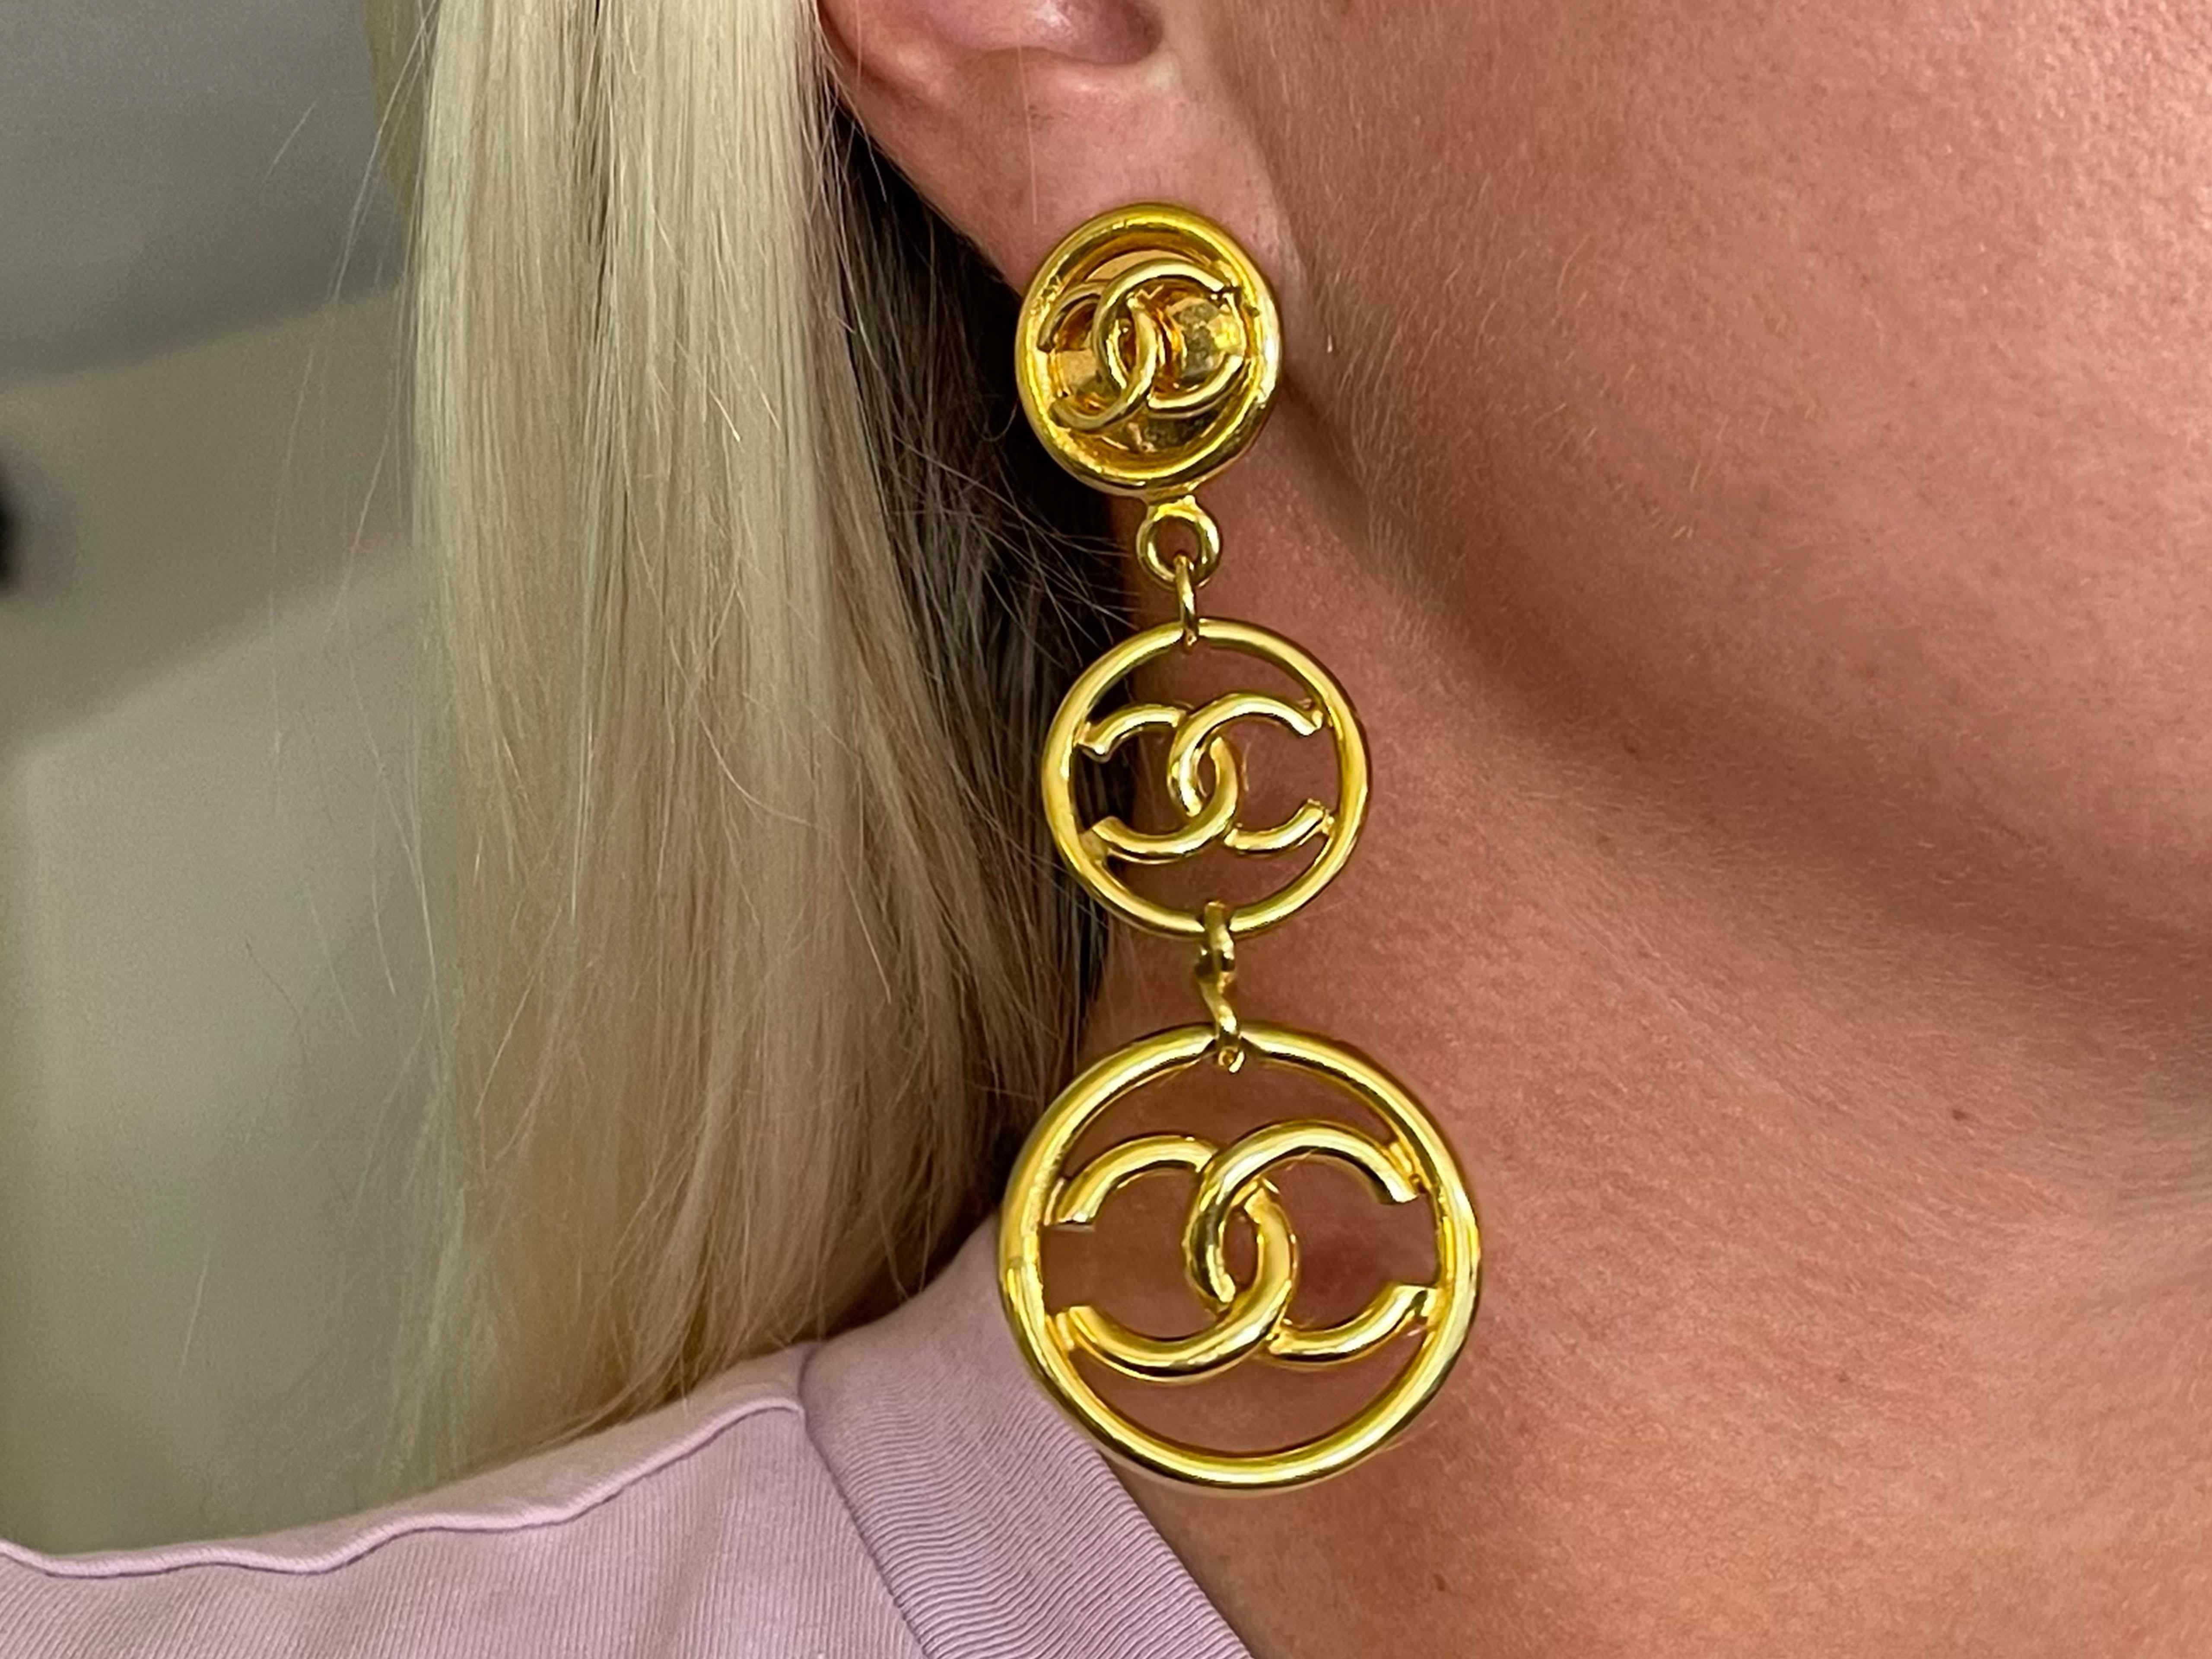 Specifications:

Designer: CHANEL

Total Weight: 39.1 Grams

Earring Length: ~3.5